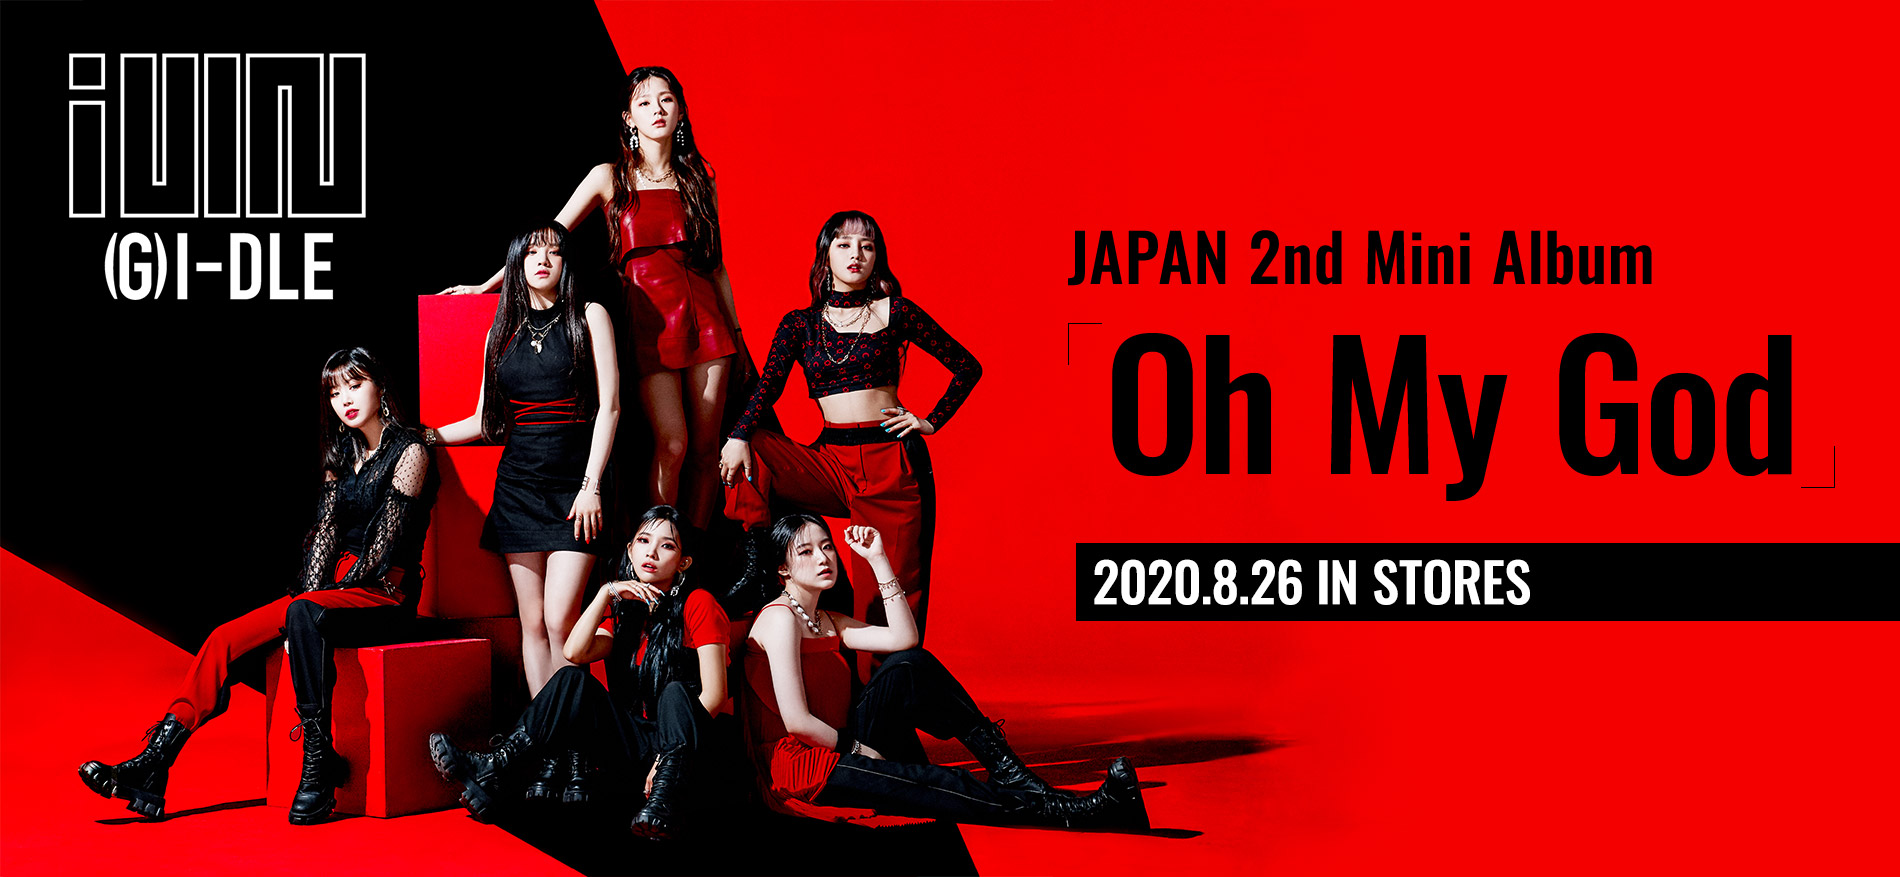 G)I-DLE JAPAN 2nd Mini Album『Oh my god』SPECIAL SITE